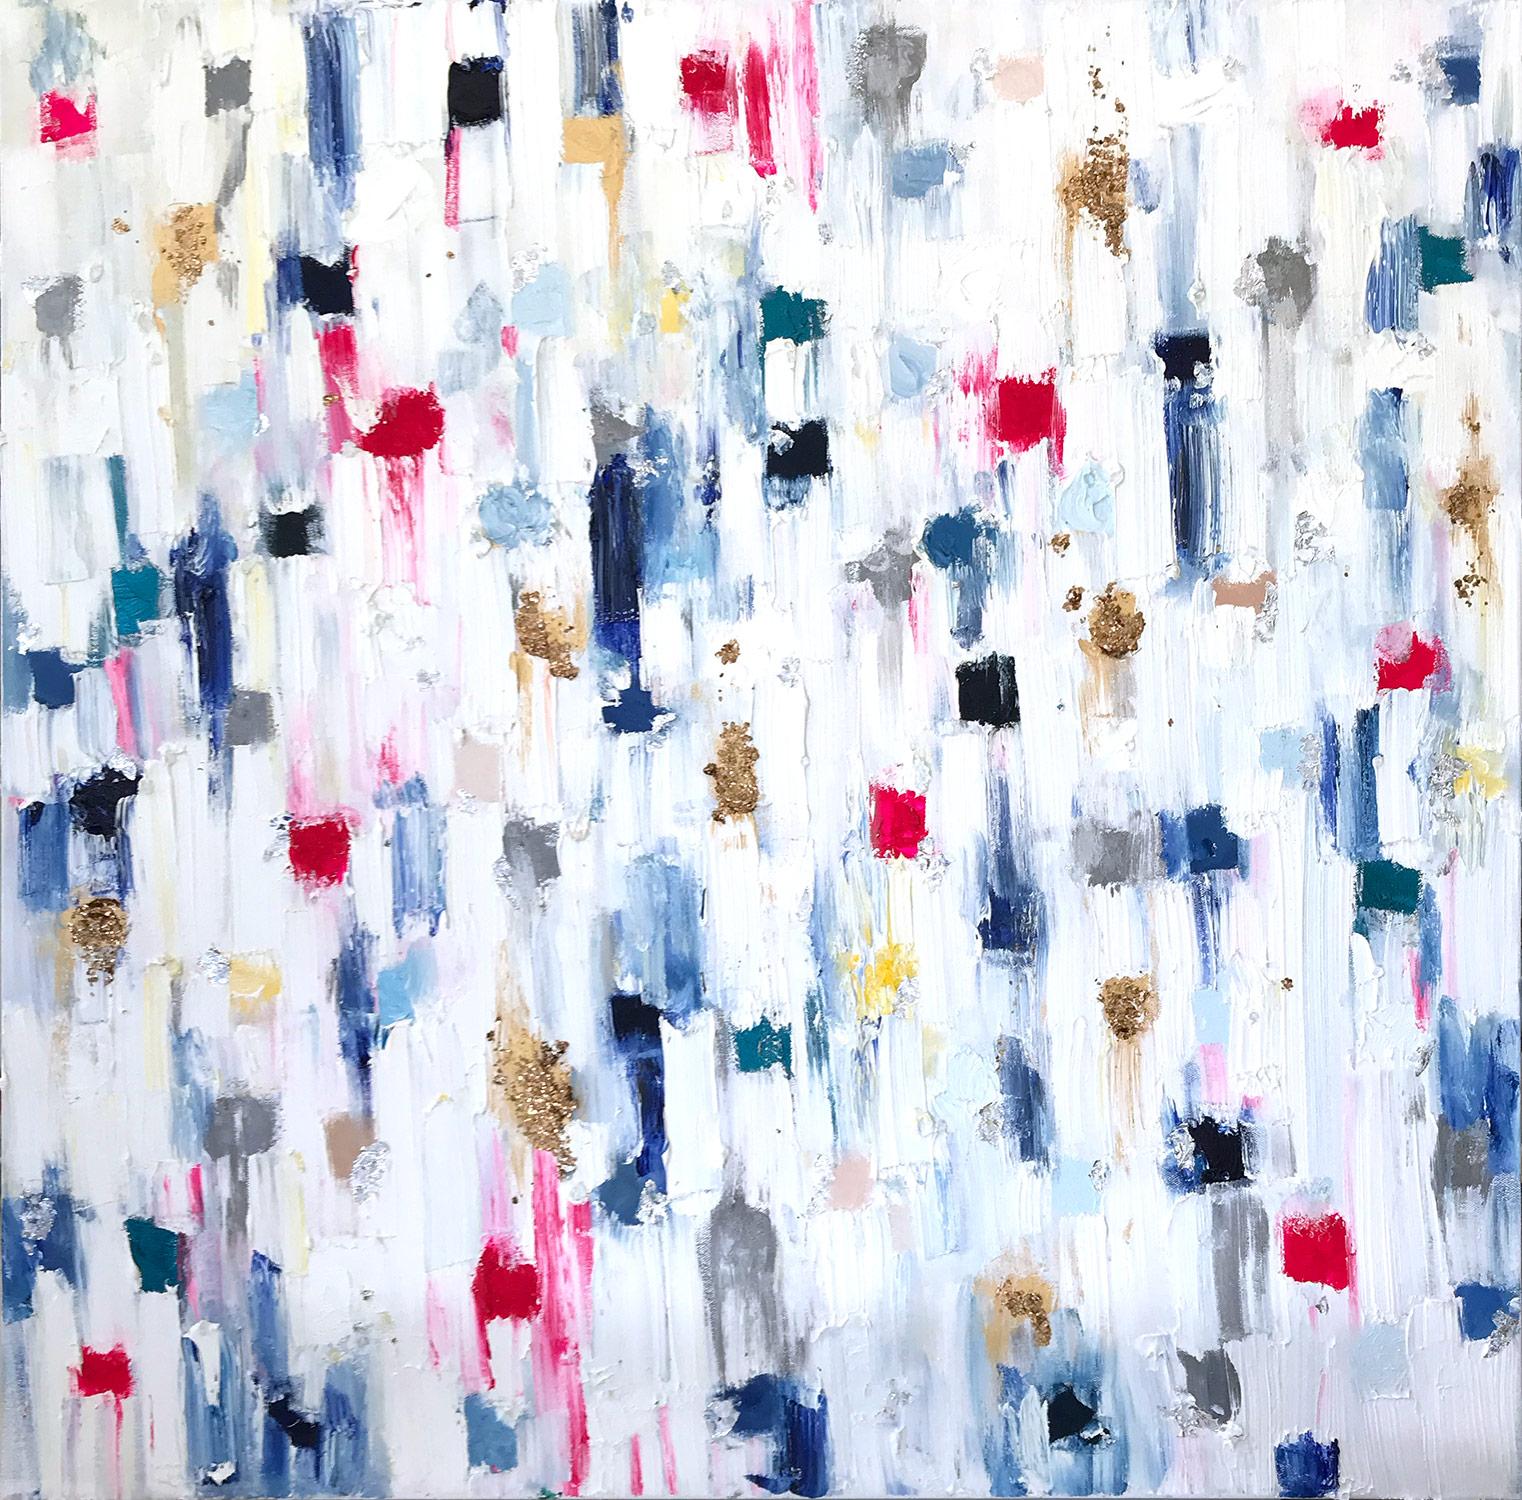 Cindy Shaoul Abstract Painting - "Dripping Dots - Portofino" Colorful Abstract Oil Painting on Canvas